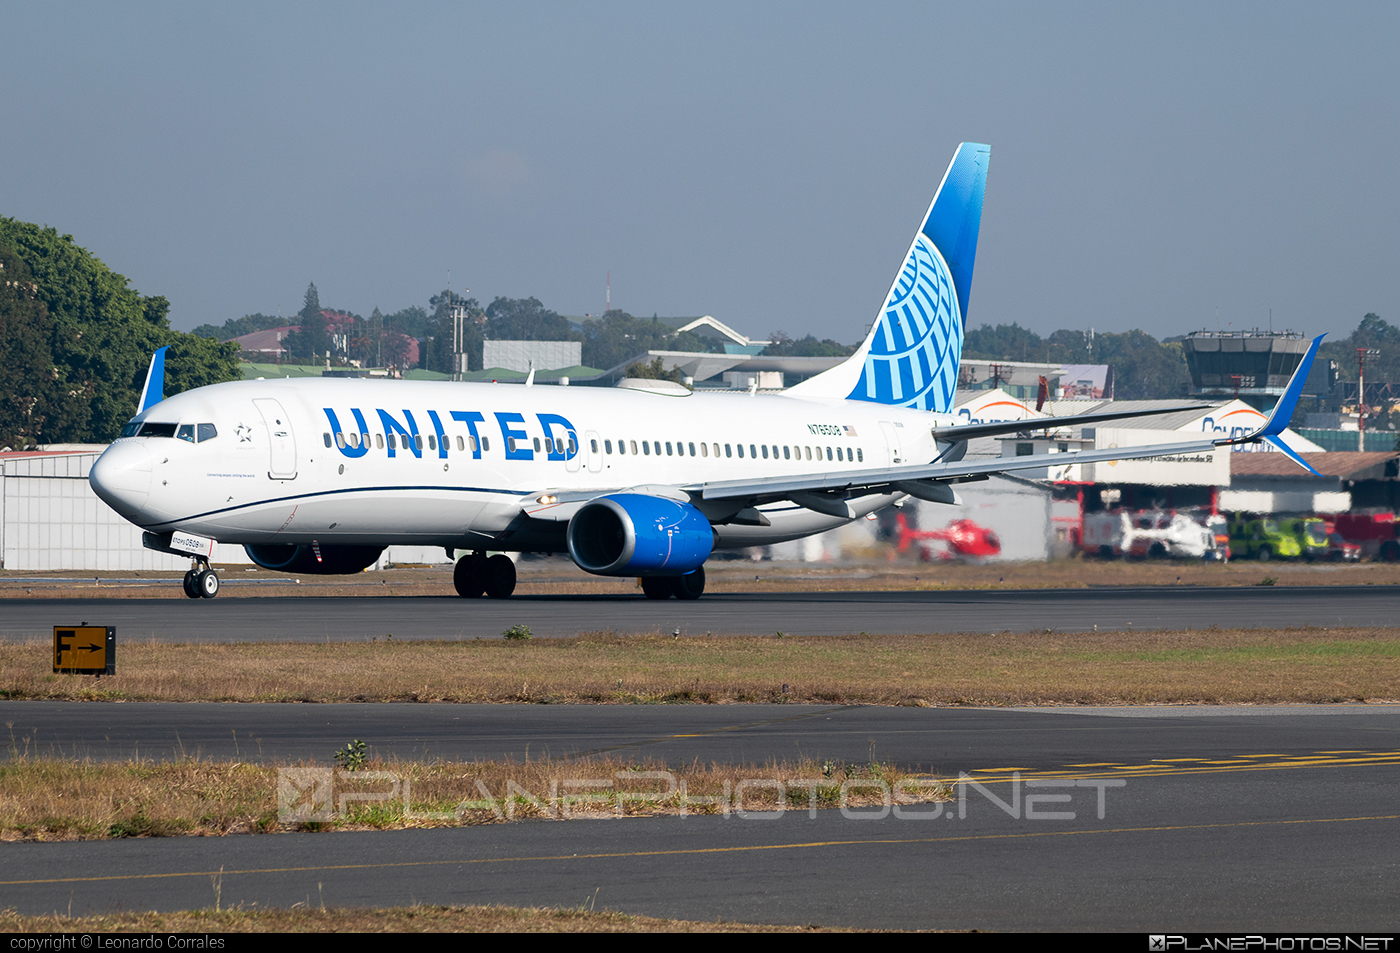 Boeing 737-800 - N76508 operated by United Airlines #b737 #b737nextgen #b737ng #boeing #boeing737 #unitedairlines